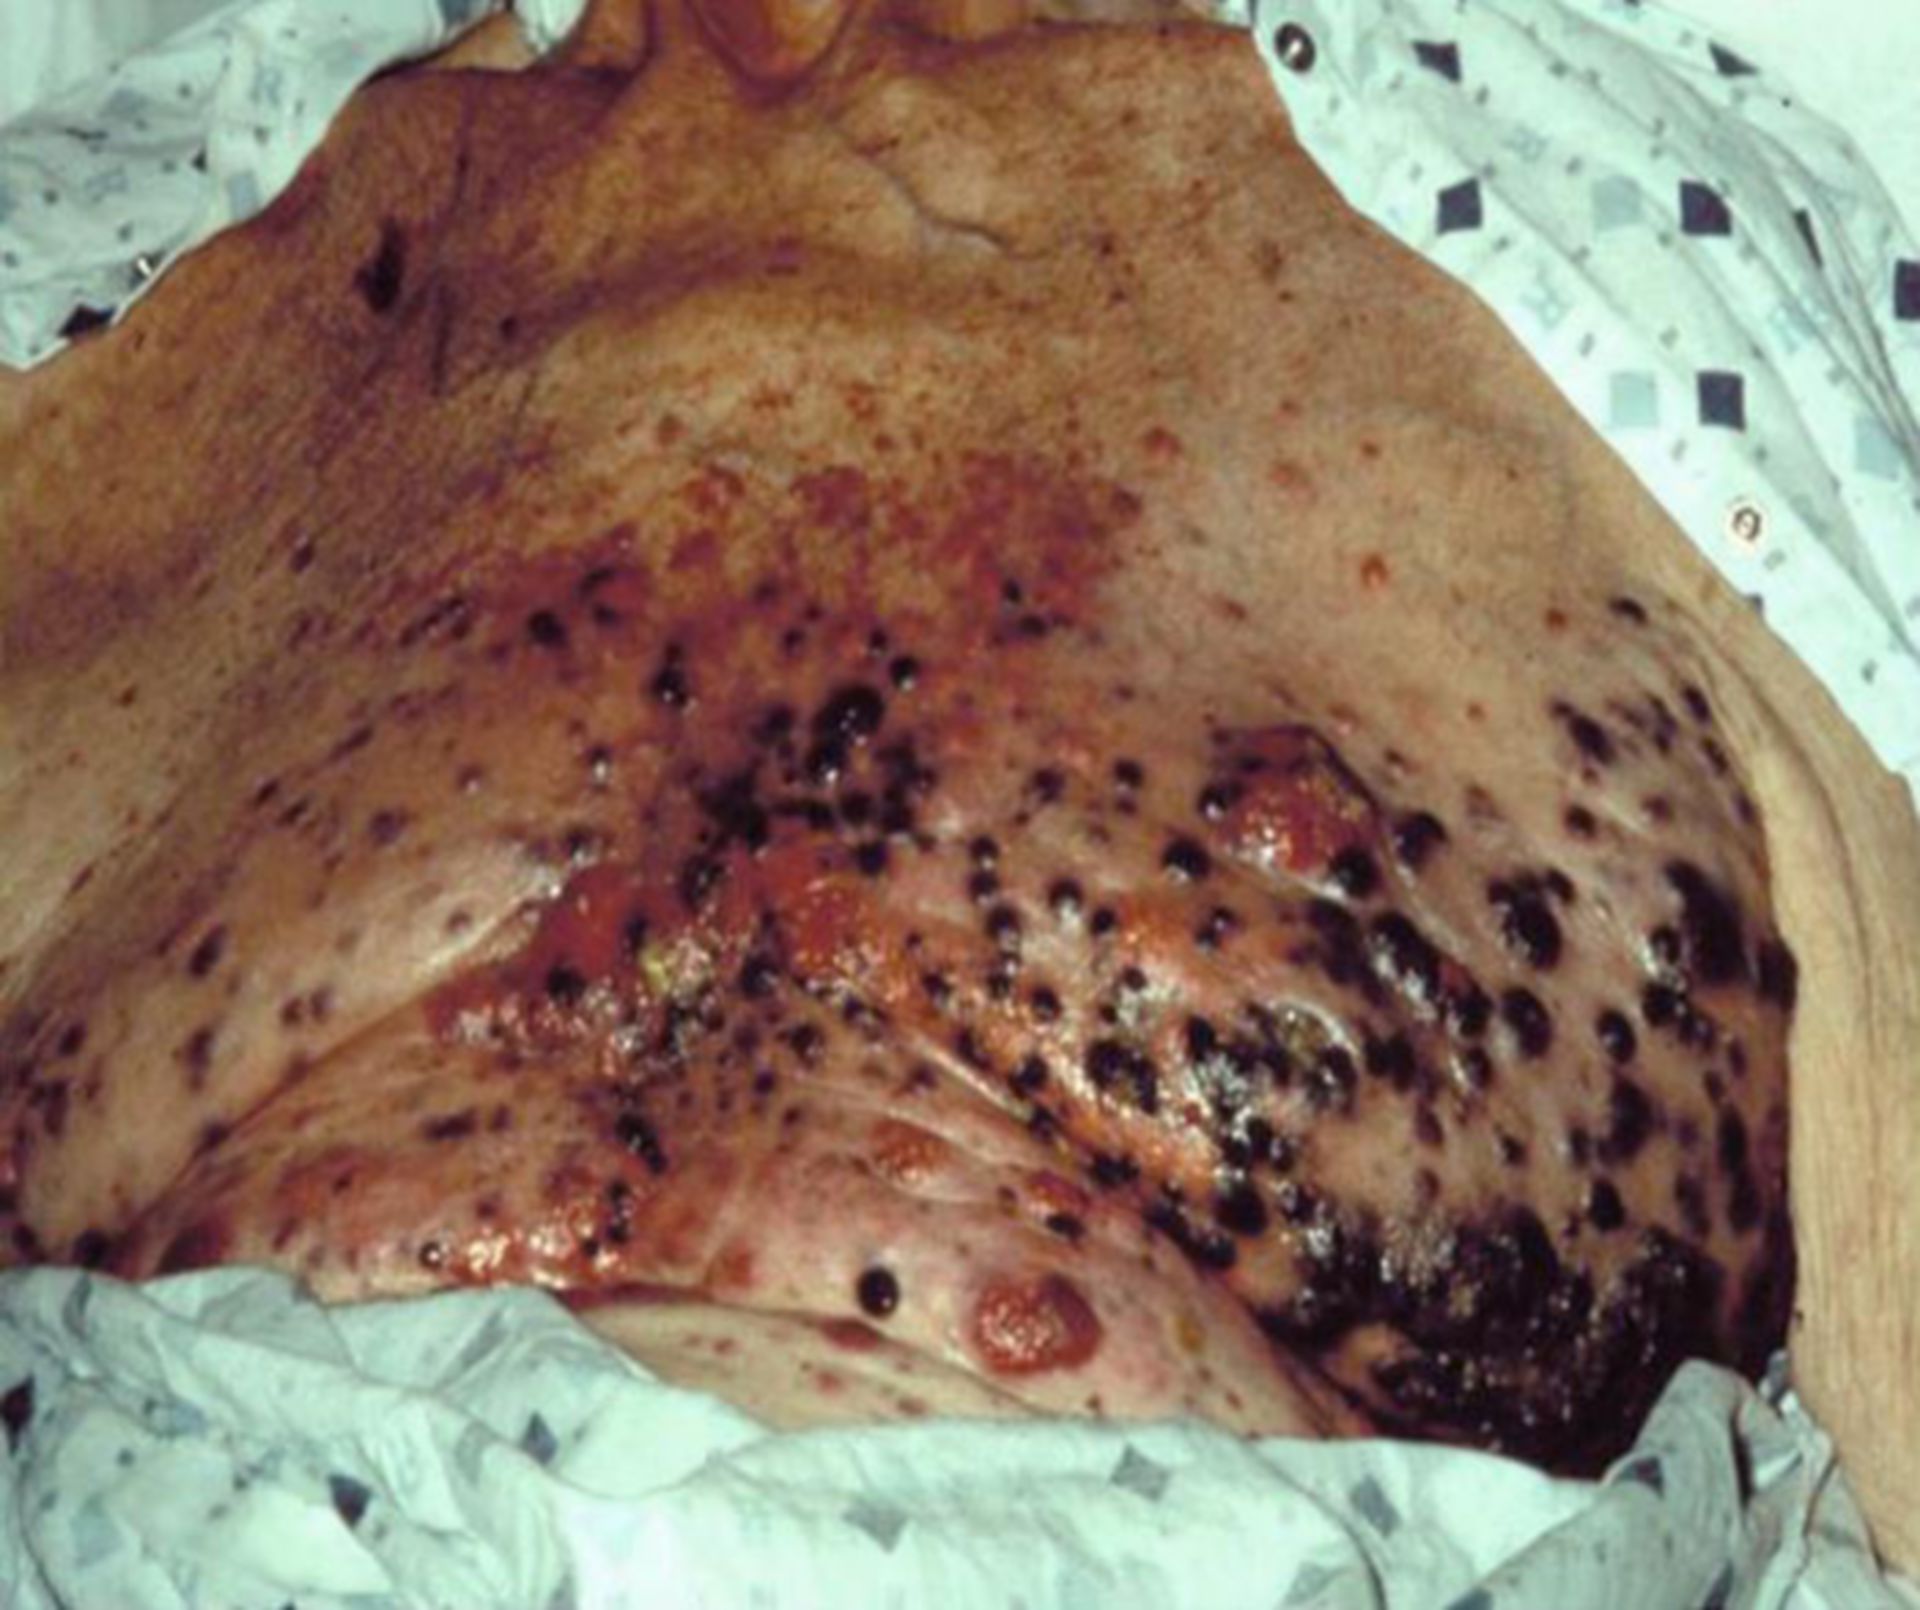 Extensive malignant melanoma on a patient's chest